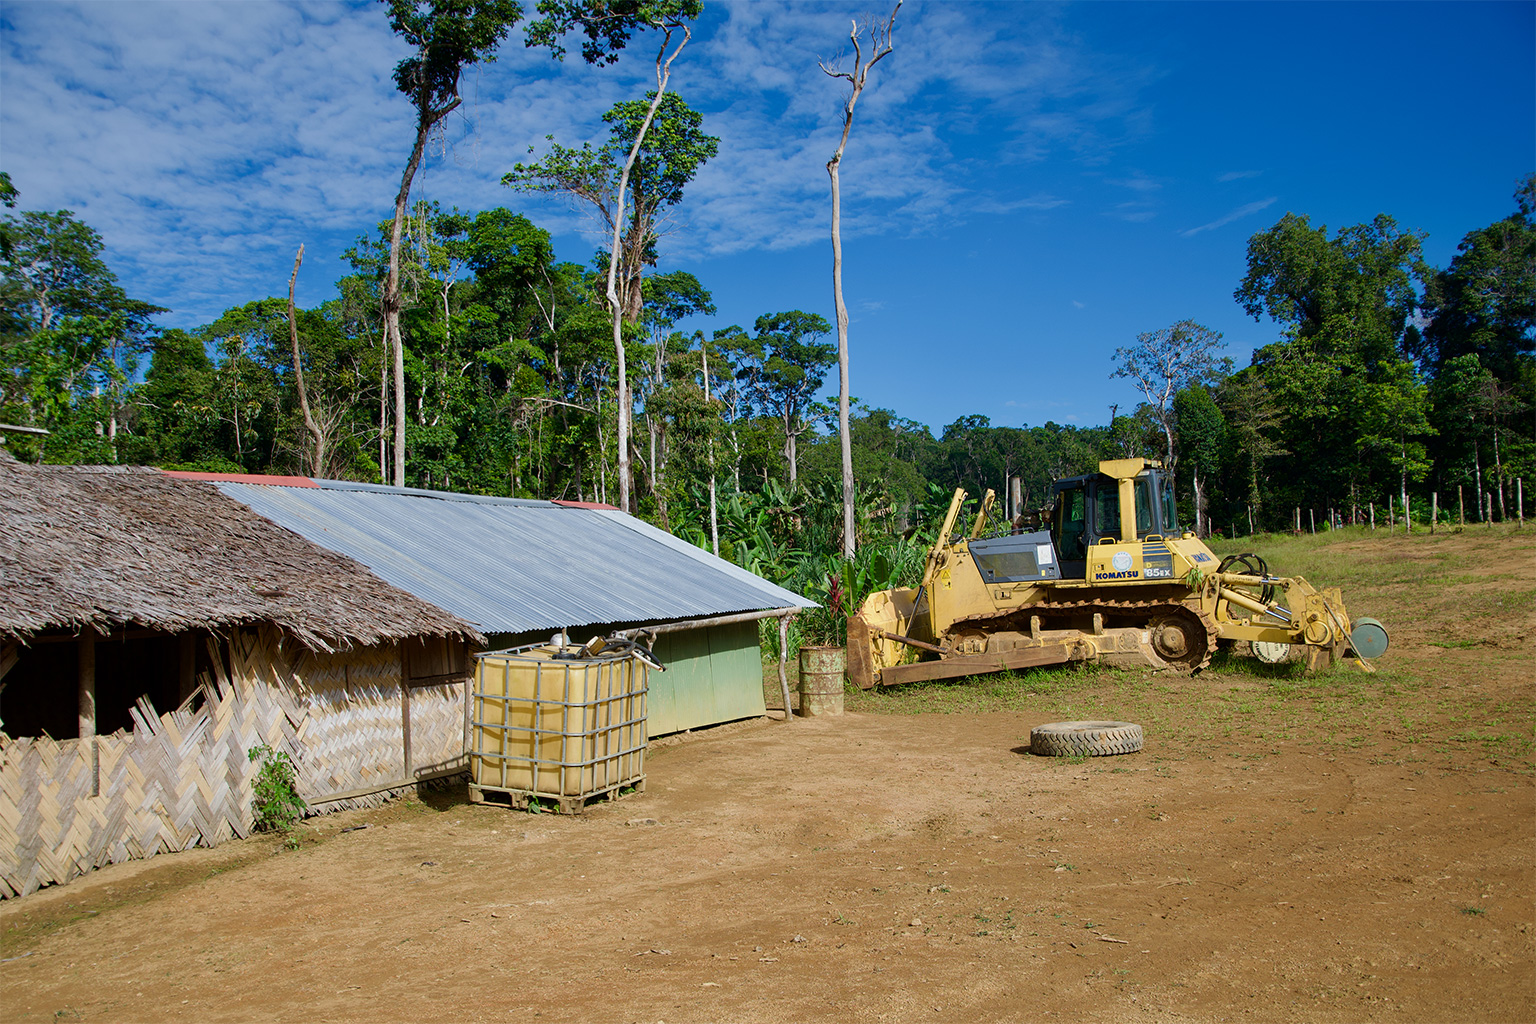 The Hicz construction company base in Muku.